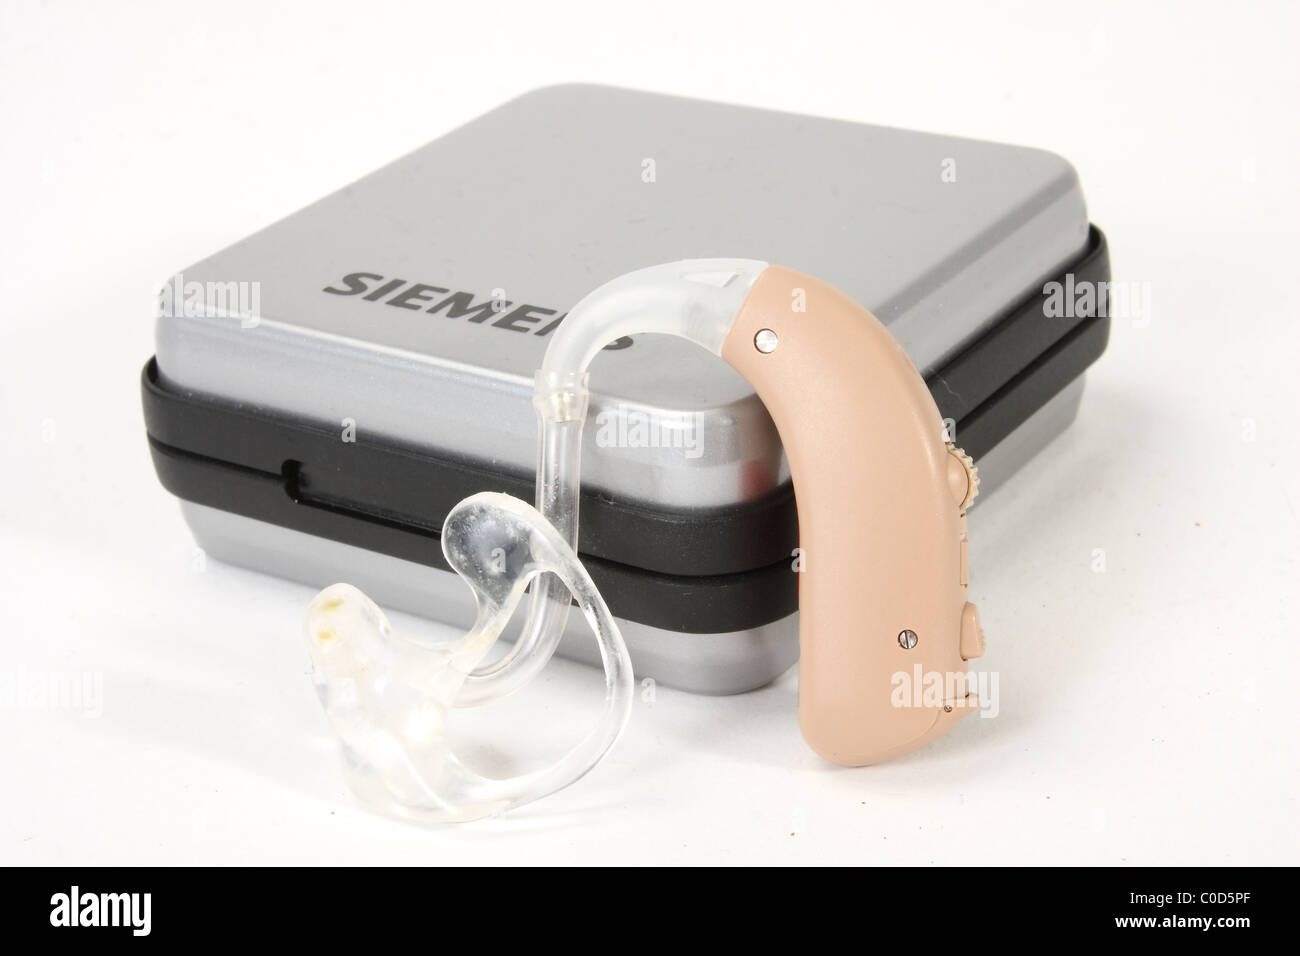 A digital hearing aid by Siemens for a NHS hearing aid fitting. Including an ear mold and box. Stock Photo